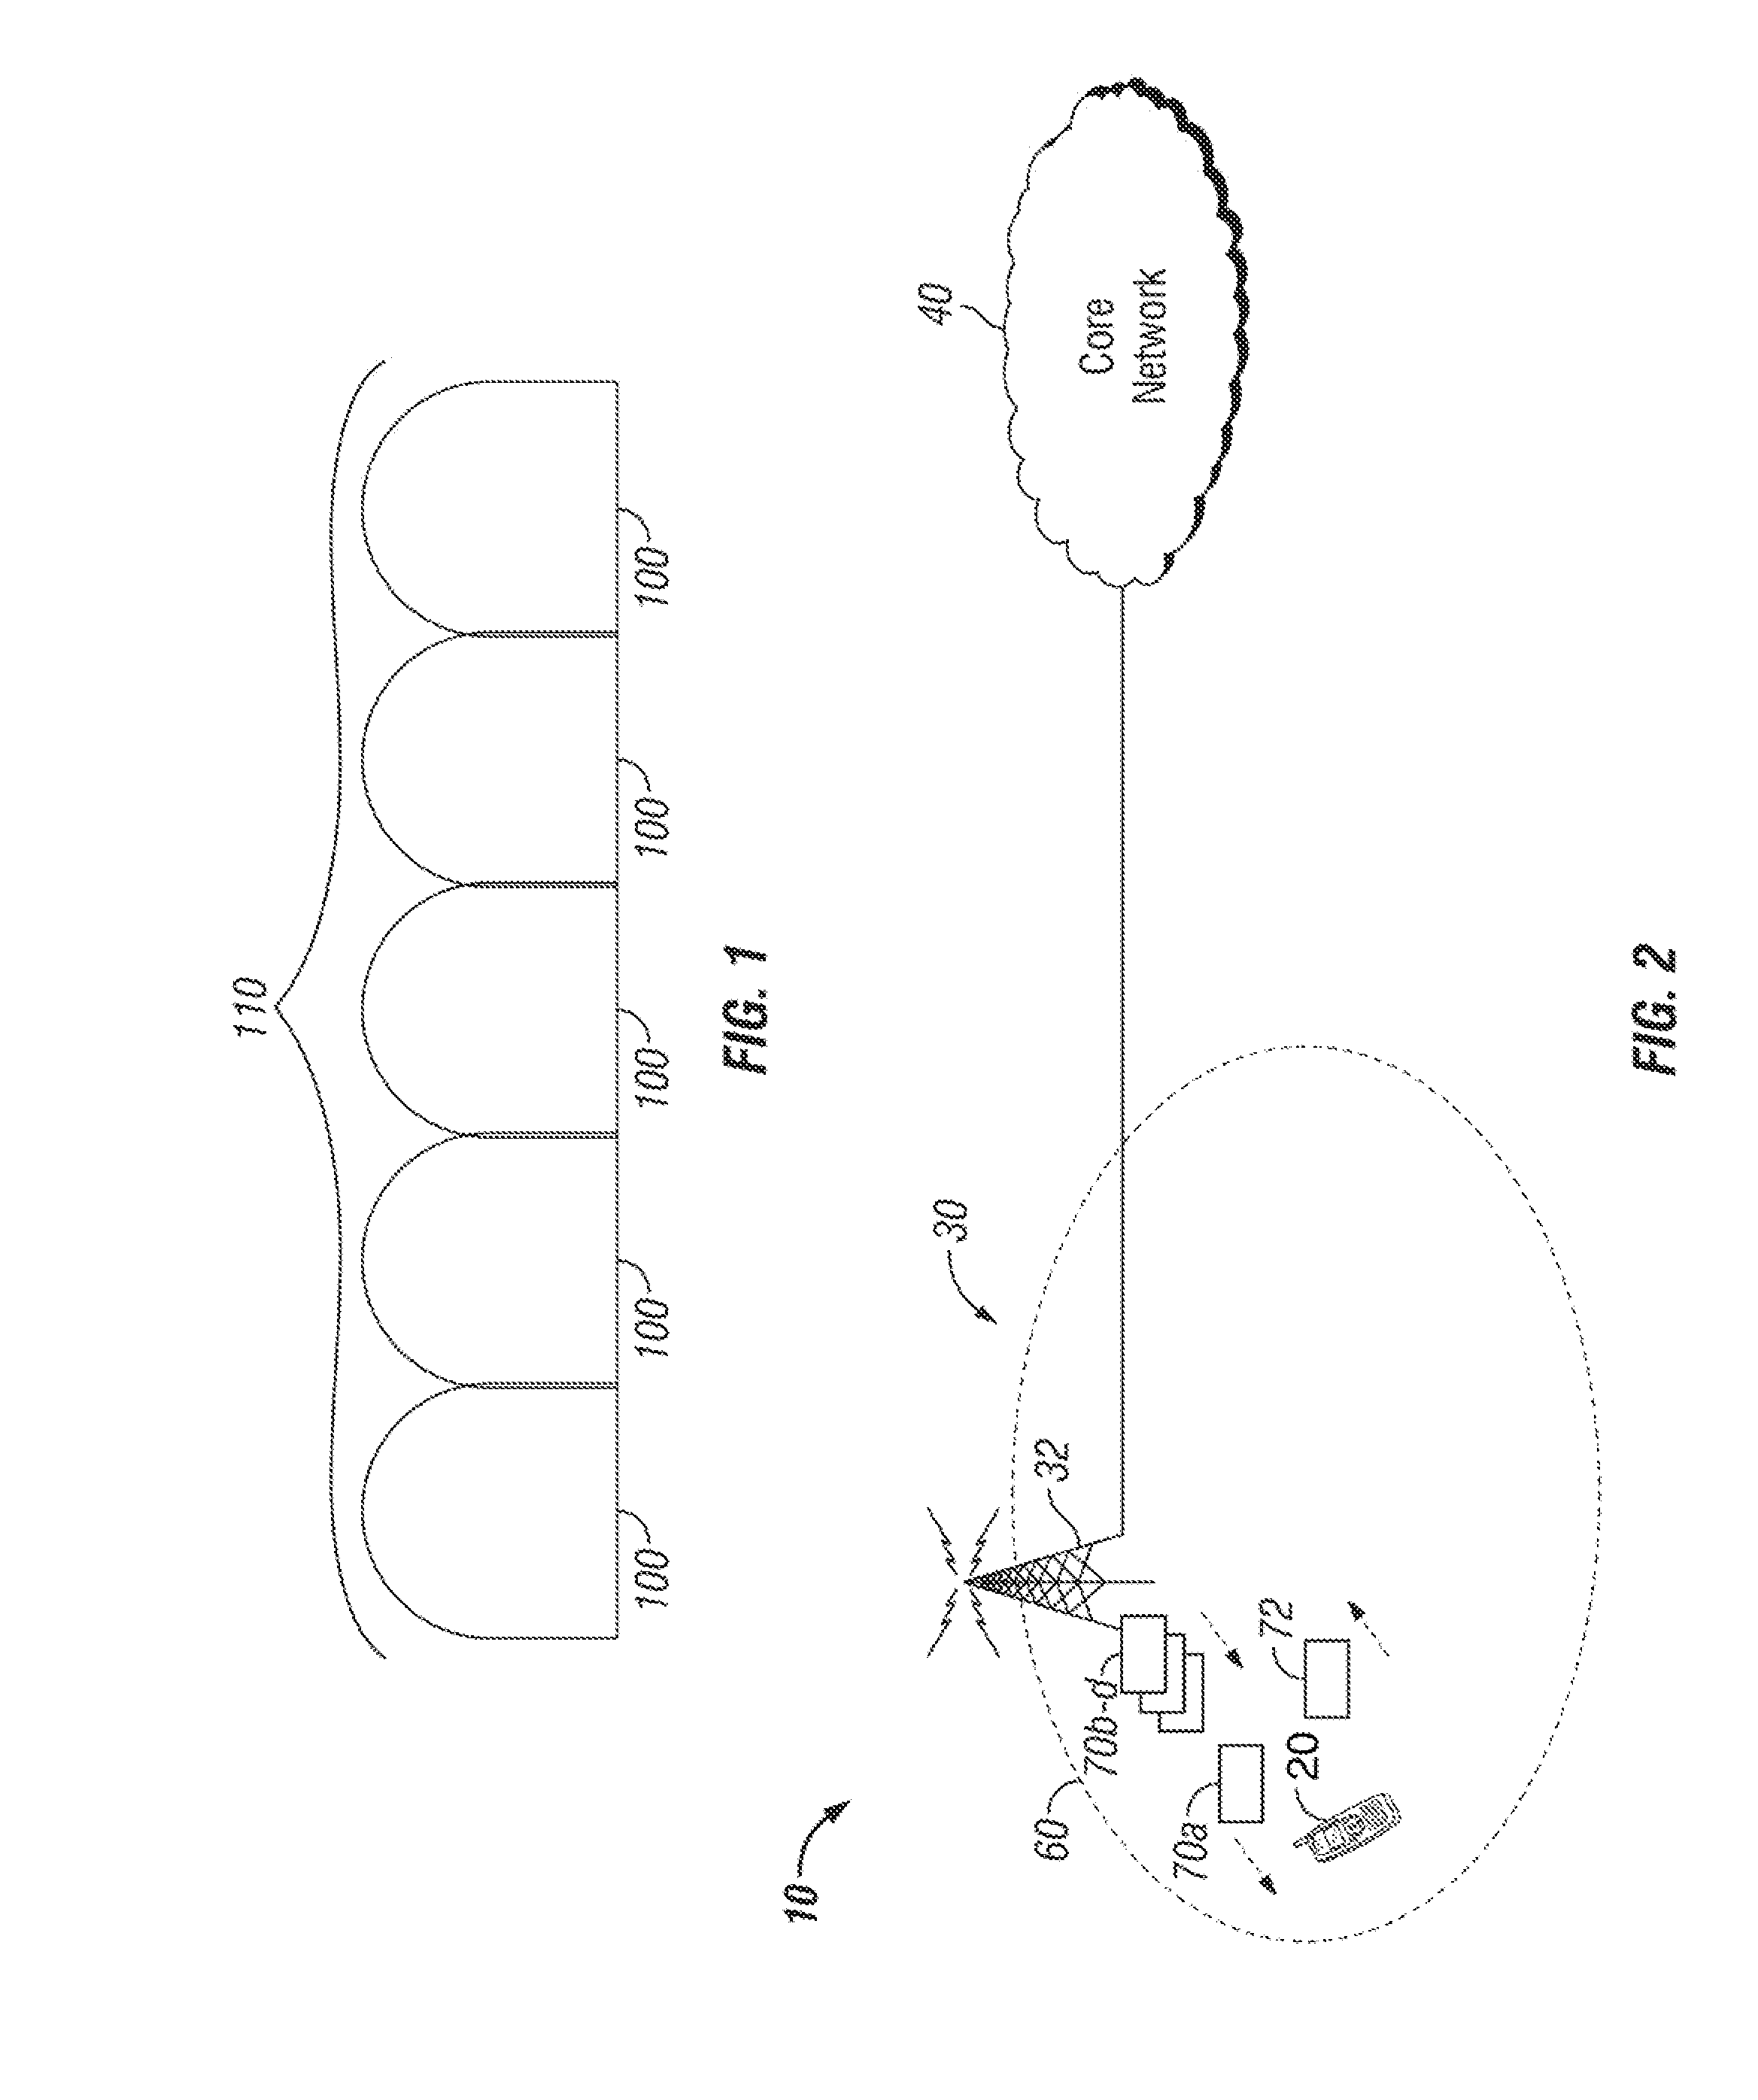 System and Method for Signaling Control Information in a Mobile Communication Network